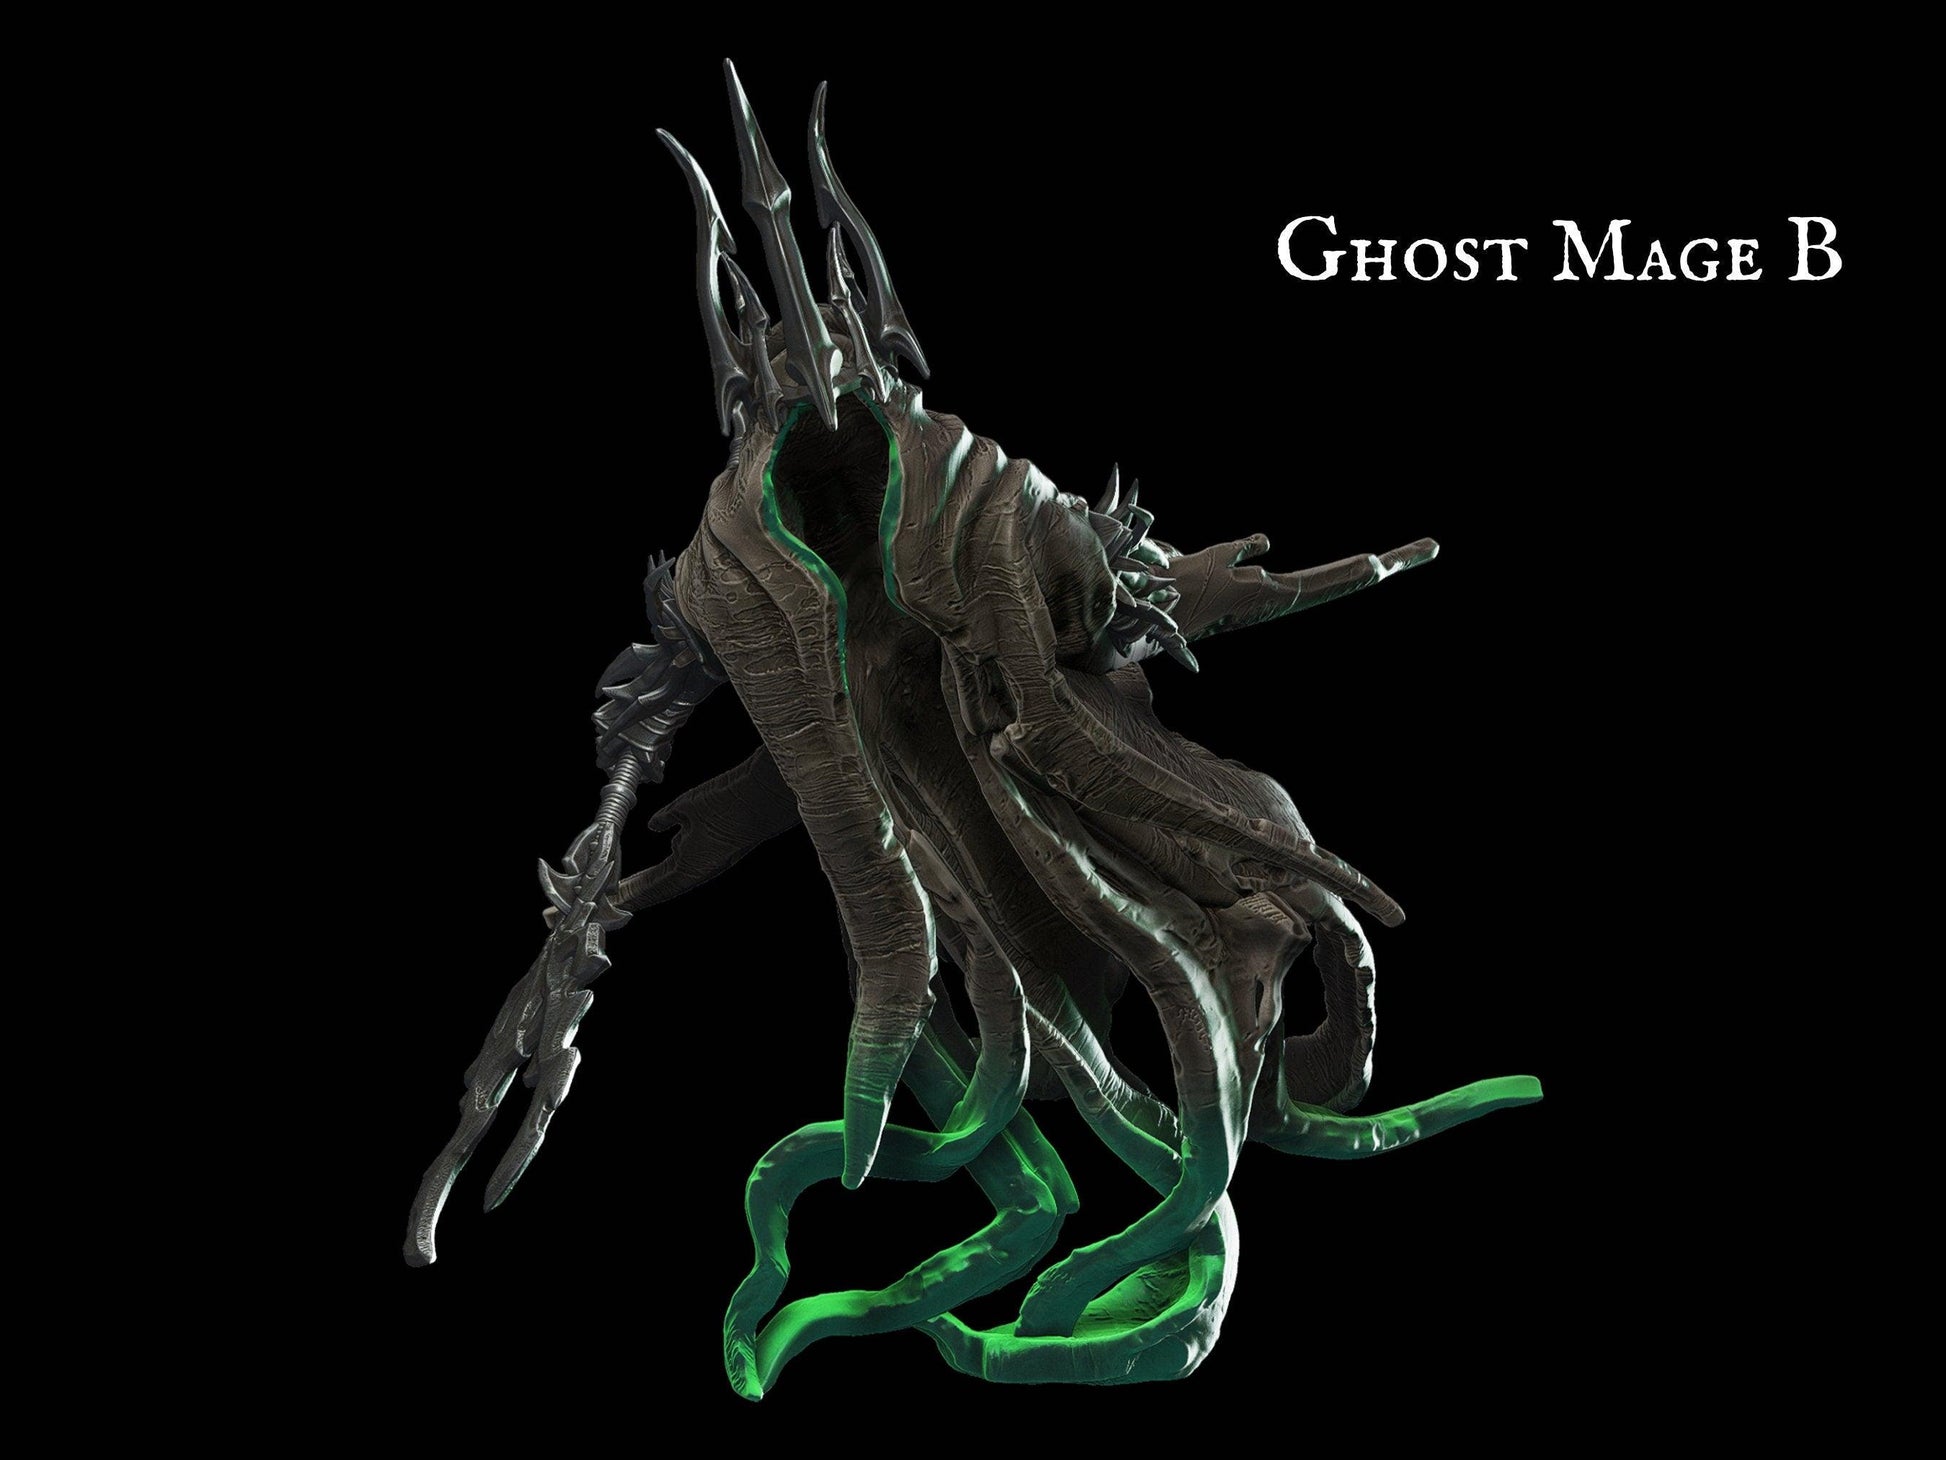 Mage Ghost Miniature ttrpg miniature - 28mm scale Tabletop gaming DnD Miniature Dungeons and Dragons, Mage miniature, dnd 5e wargaming - Plague Miniatures shop for DnD Miniatures